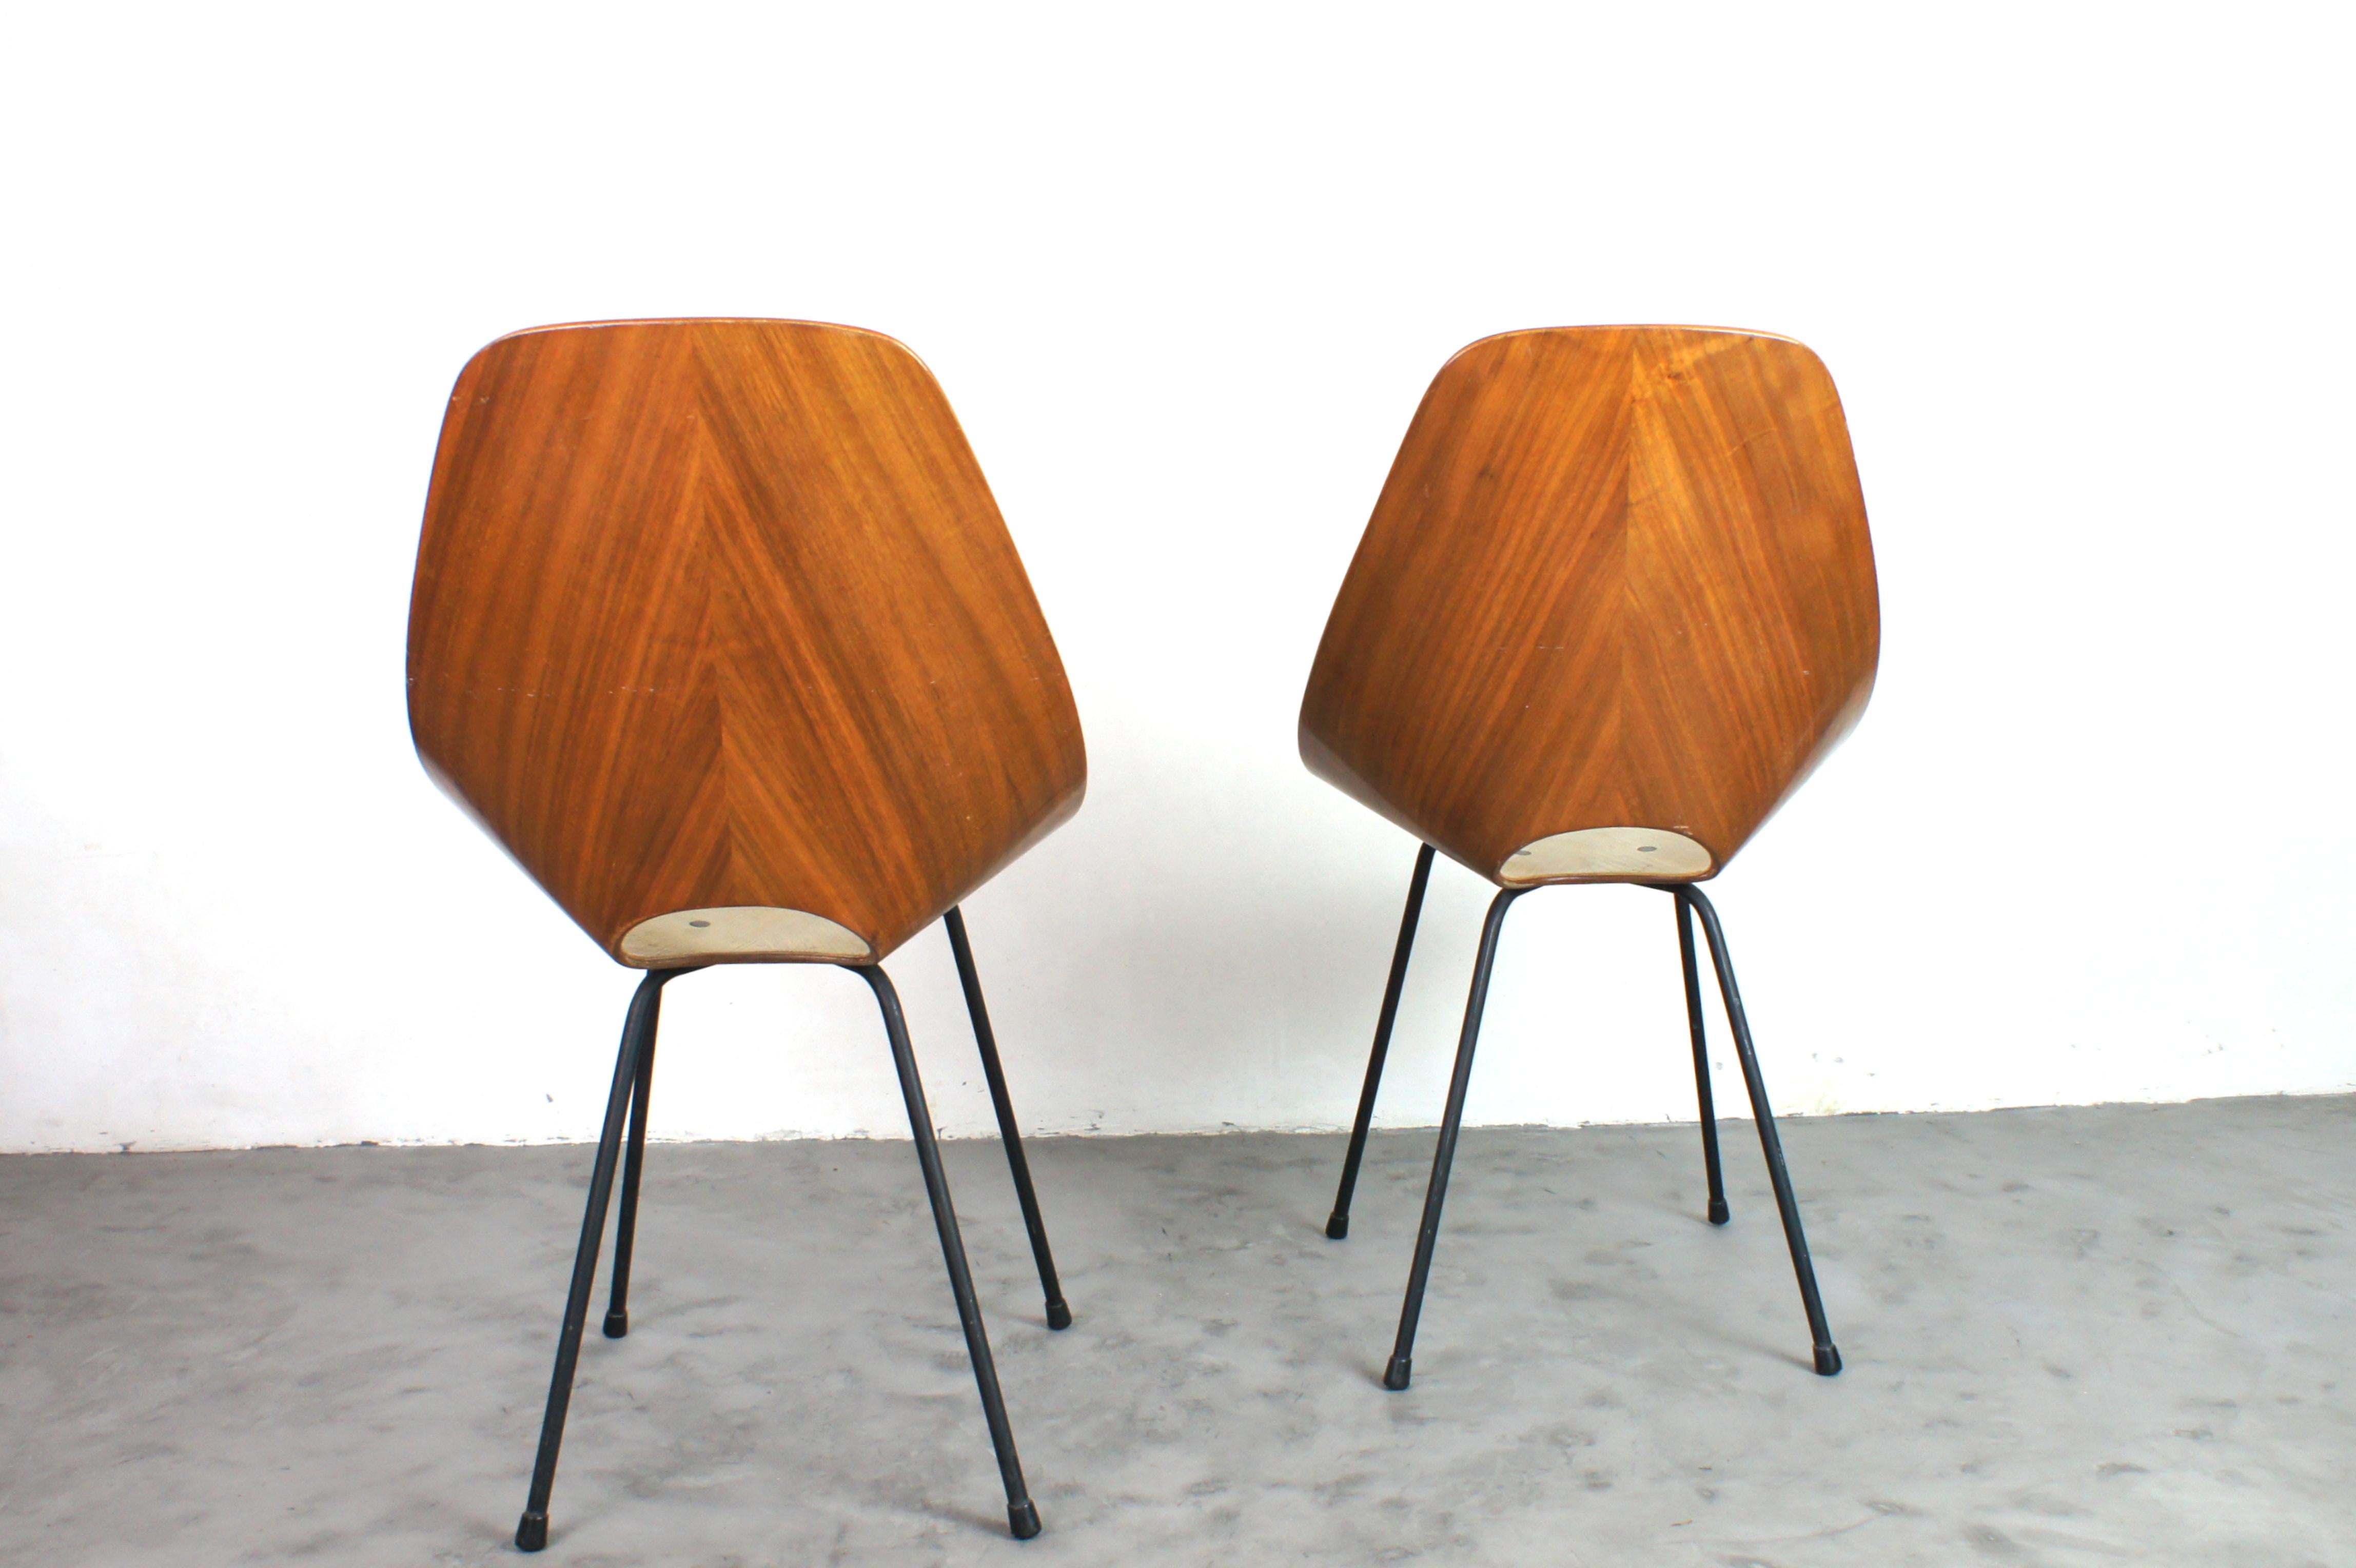 Italian Pair of 'medea' chairs by vittorio nobili for tagliabue brothers italy 1950s For Sale